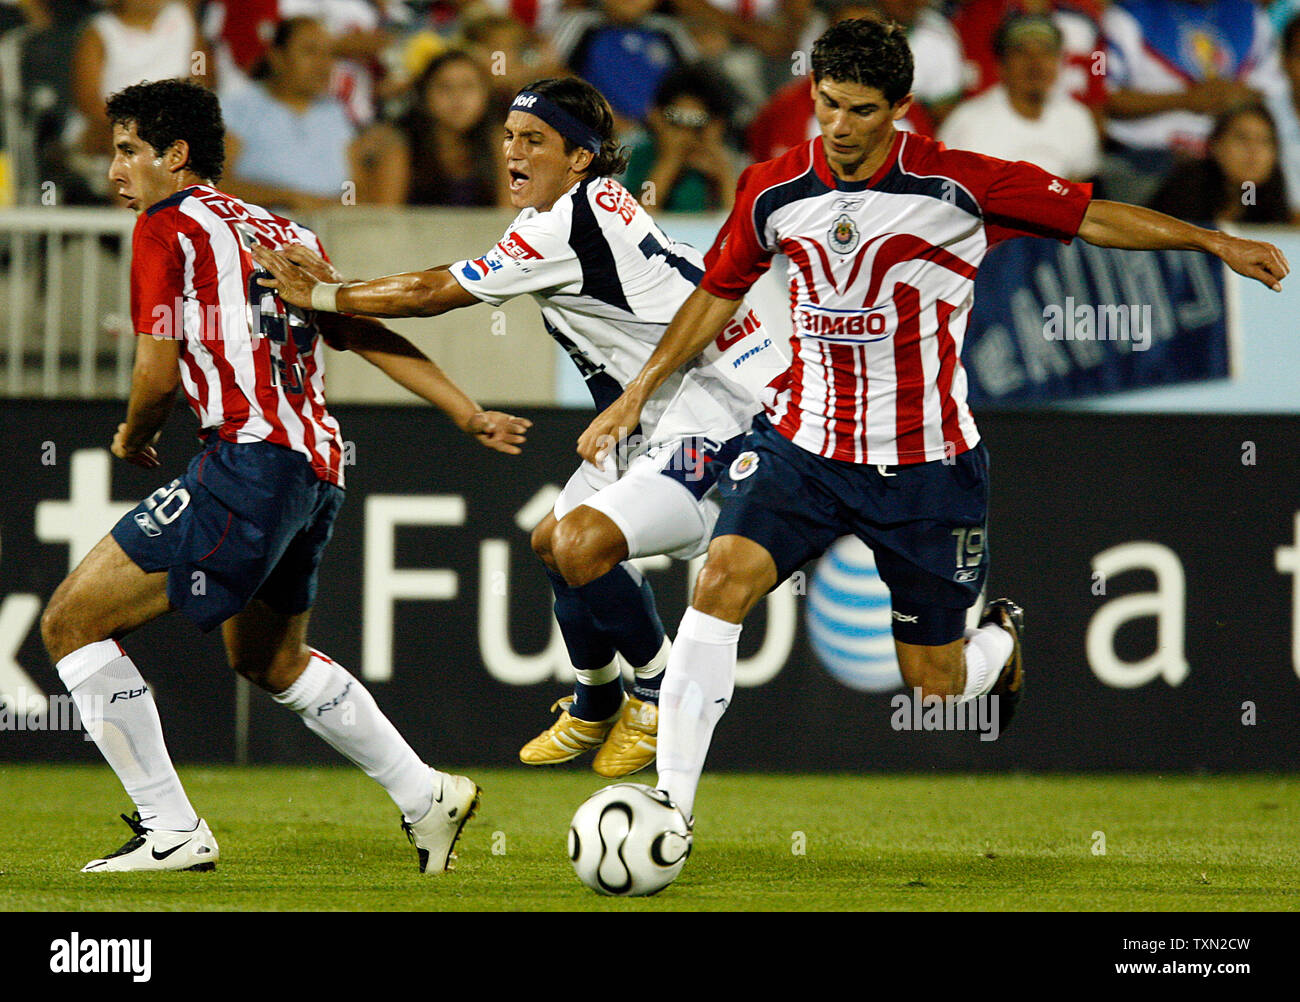 CF Pachuca forward Andres Chitiva (C) loses the ball between two CD Guadalajara defenders Edgar Mejia (L) and Jonny Magallon in the second half at Dick's Sporting Goods Park in Commerce City, Colorado on July 31, 2007. A Chivas win or tie over Pachuca moves the Guadalara team into the semifinals of the Superliga 2007 tournament.    (UPI Photo/Gary C. Caskey) Stock Photo